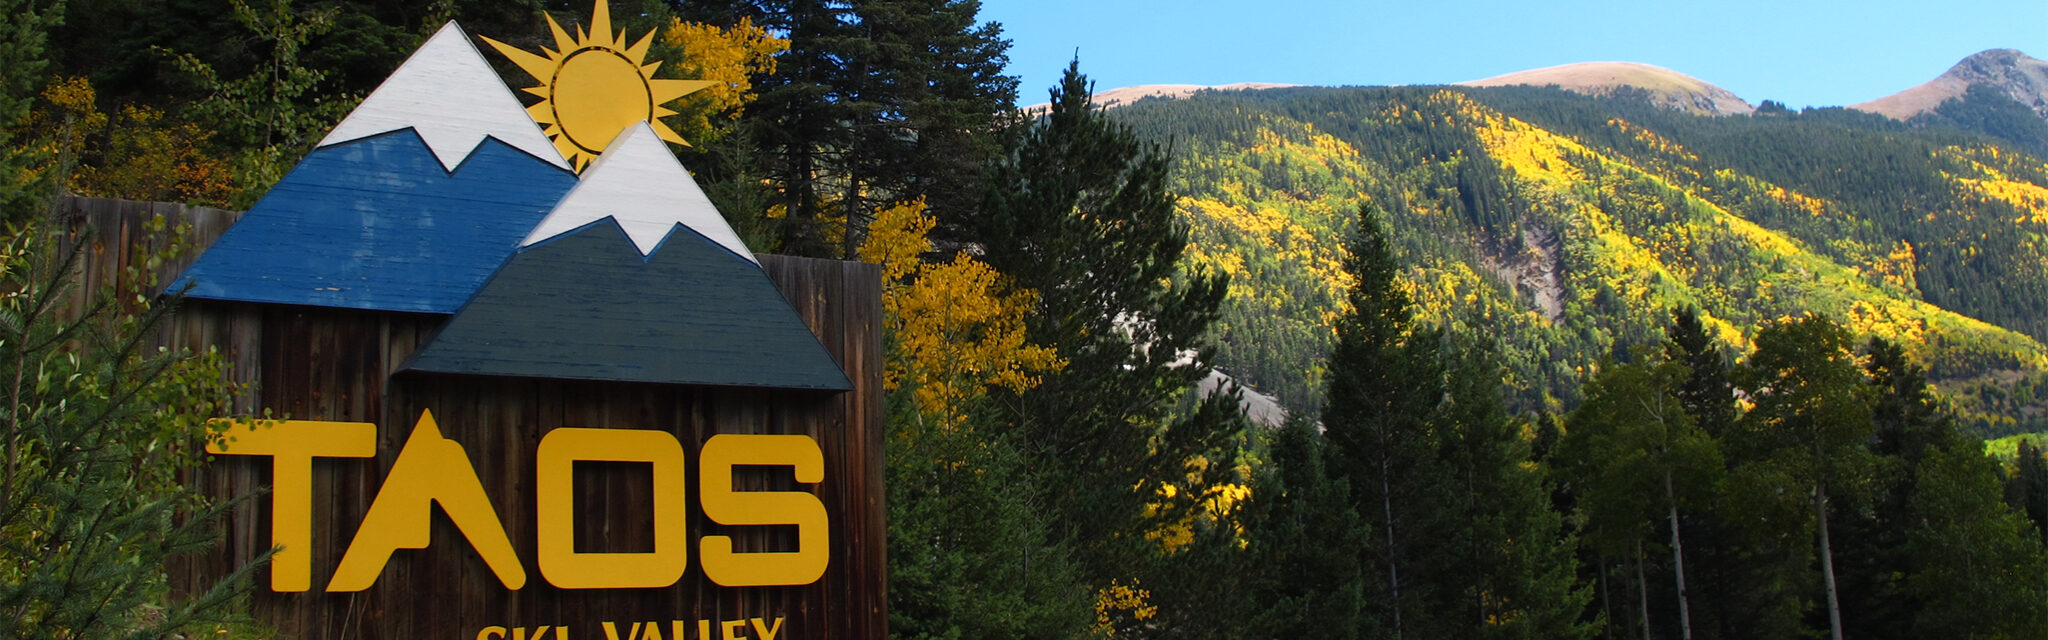 Taos Ski Valley welcome sign in the fall with colorful aspens.